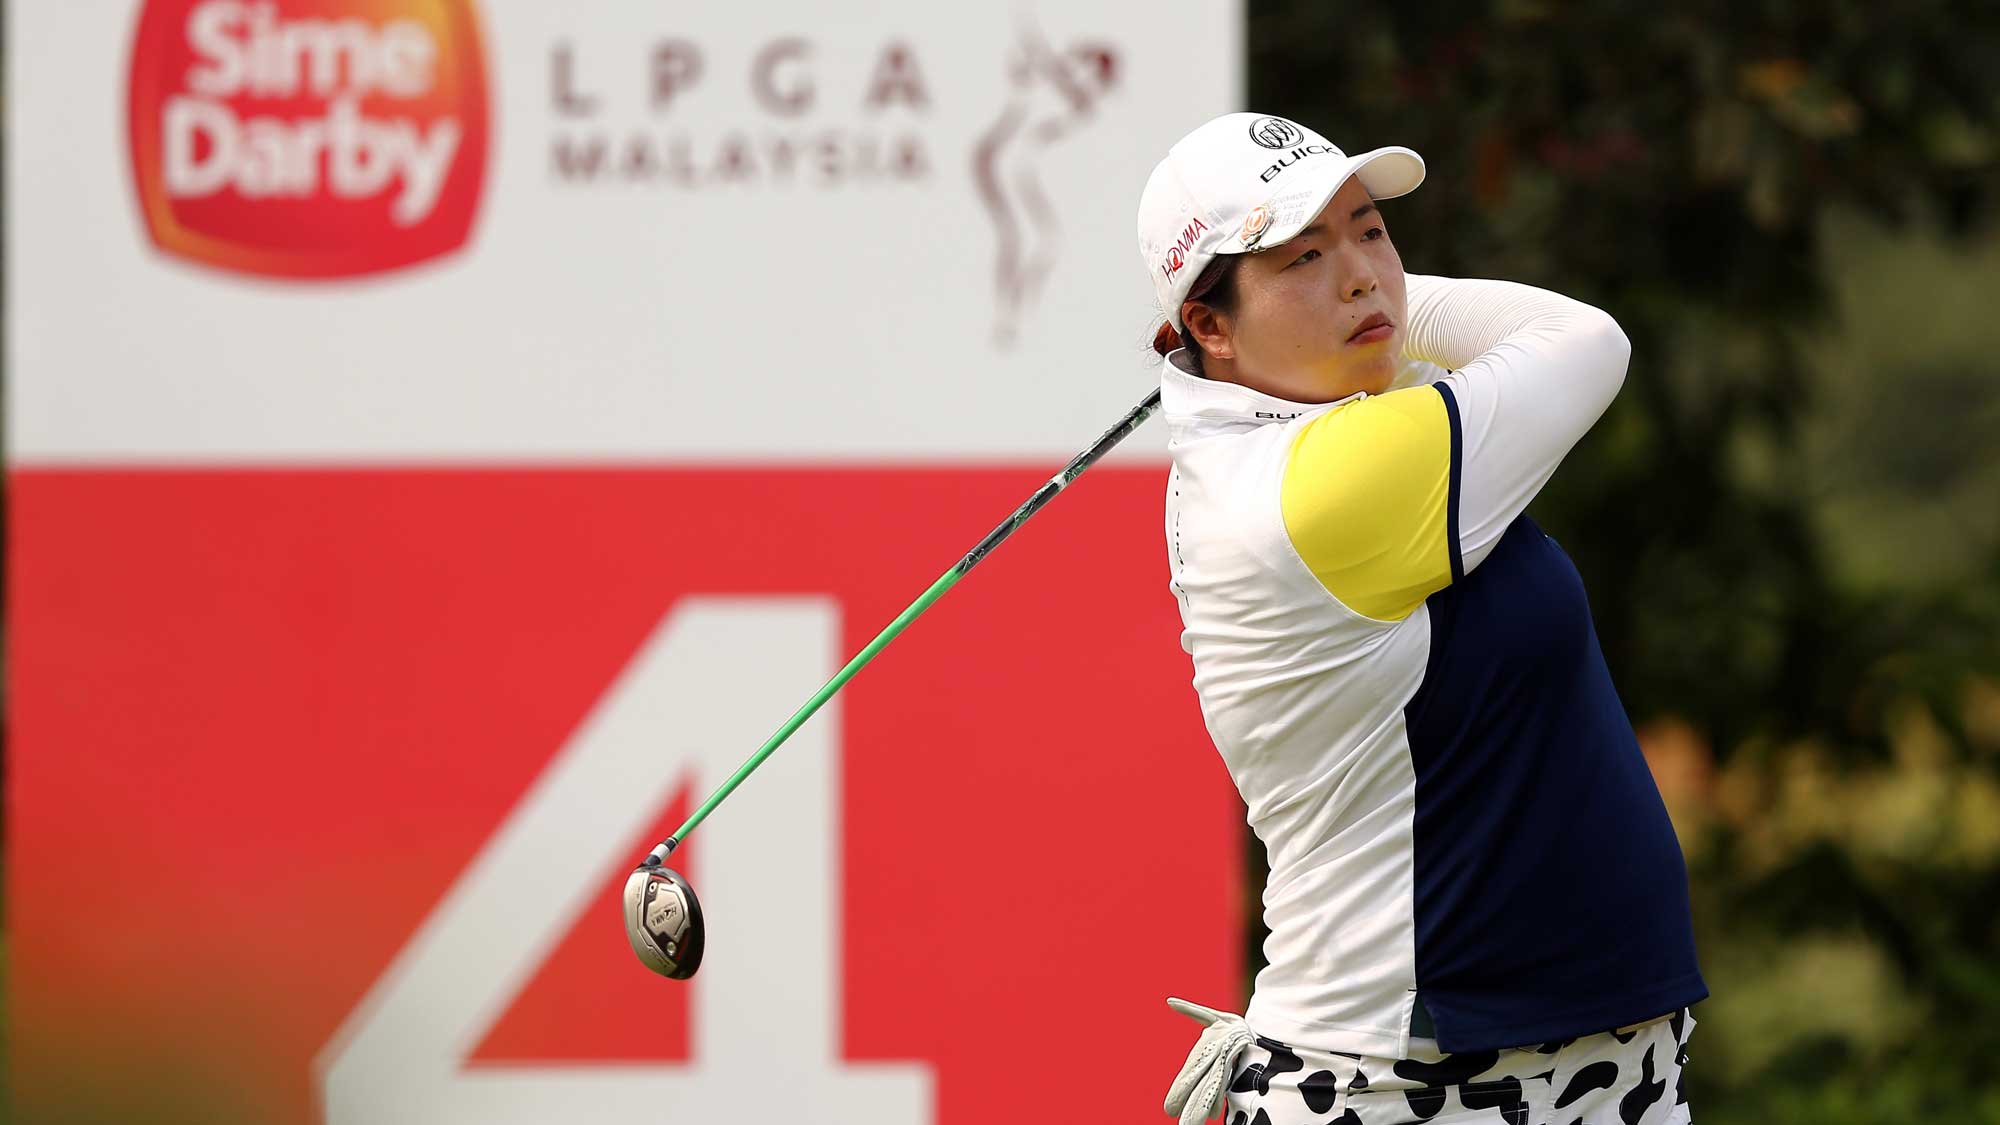 Shanshan Feng of China watches her tee shot on the 4th hole during round three of the Sime Darby LPGA Tour at Kuala Lumpur Golf & Country Club